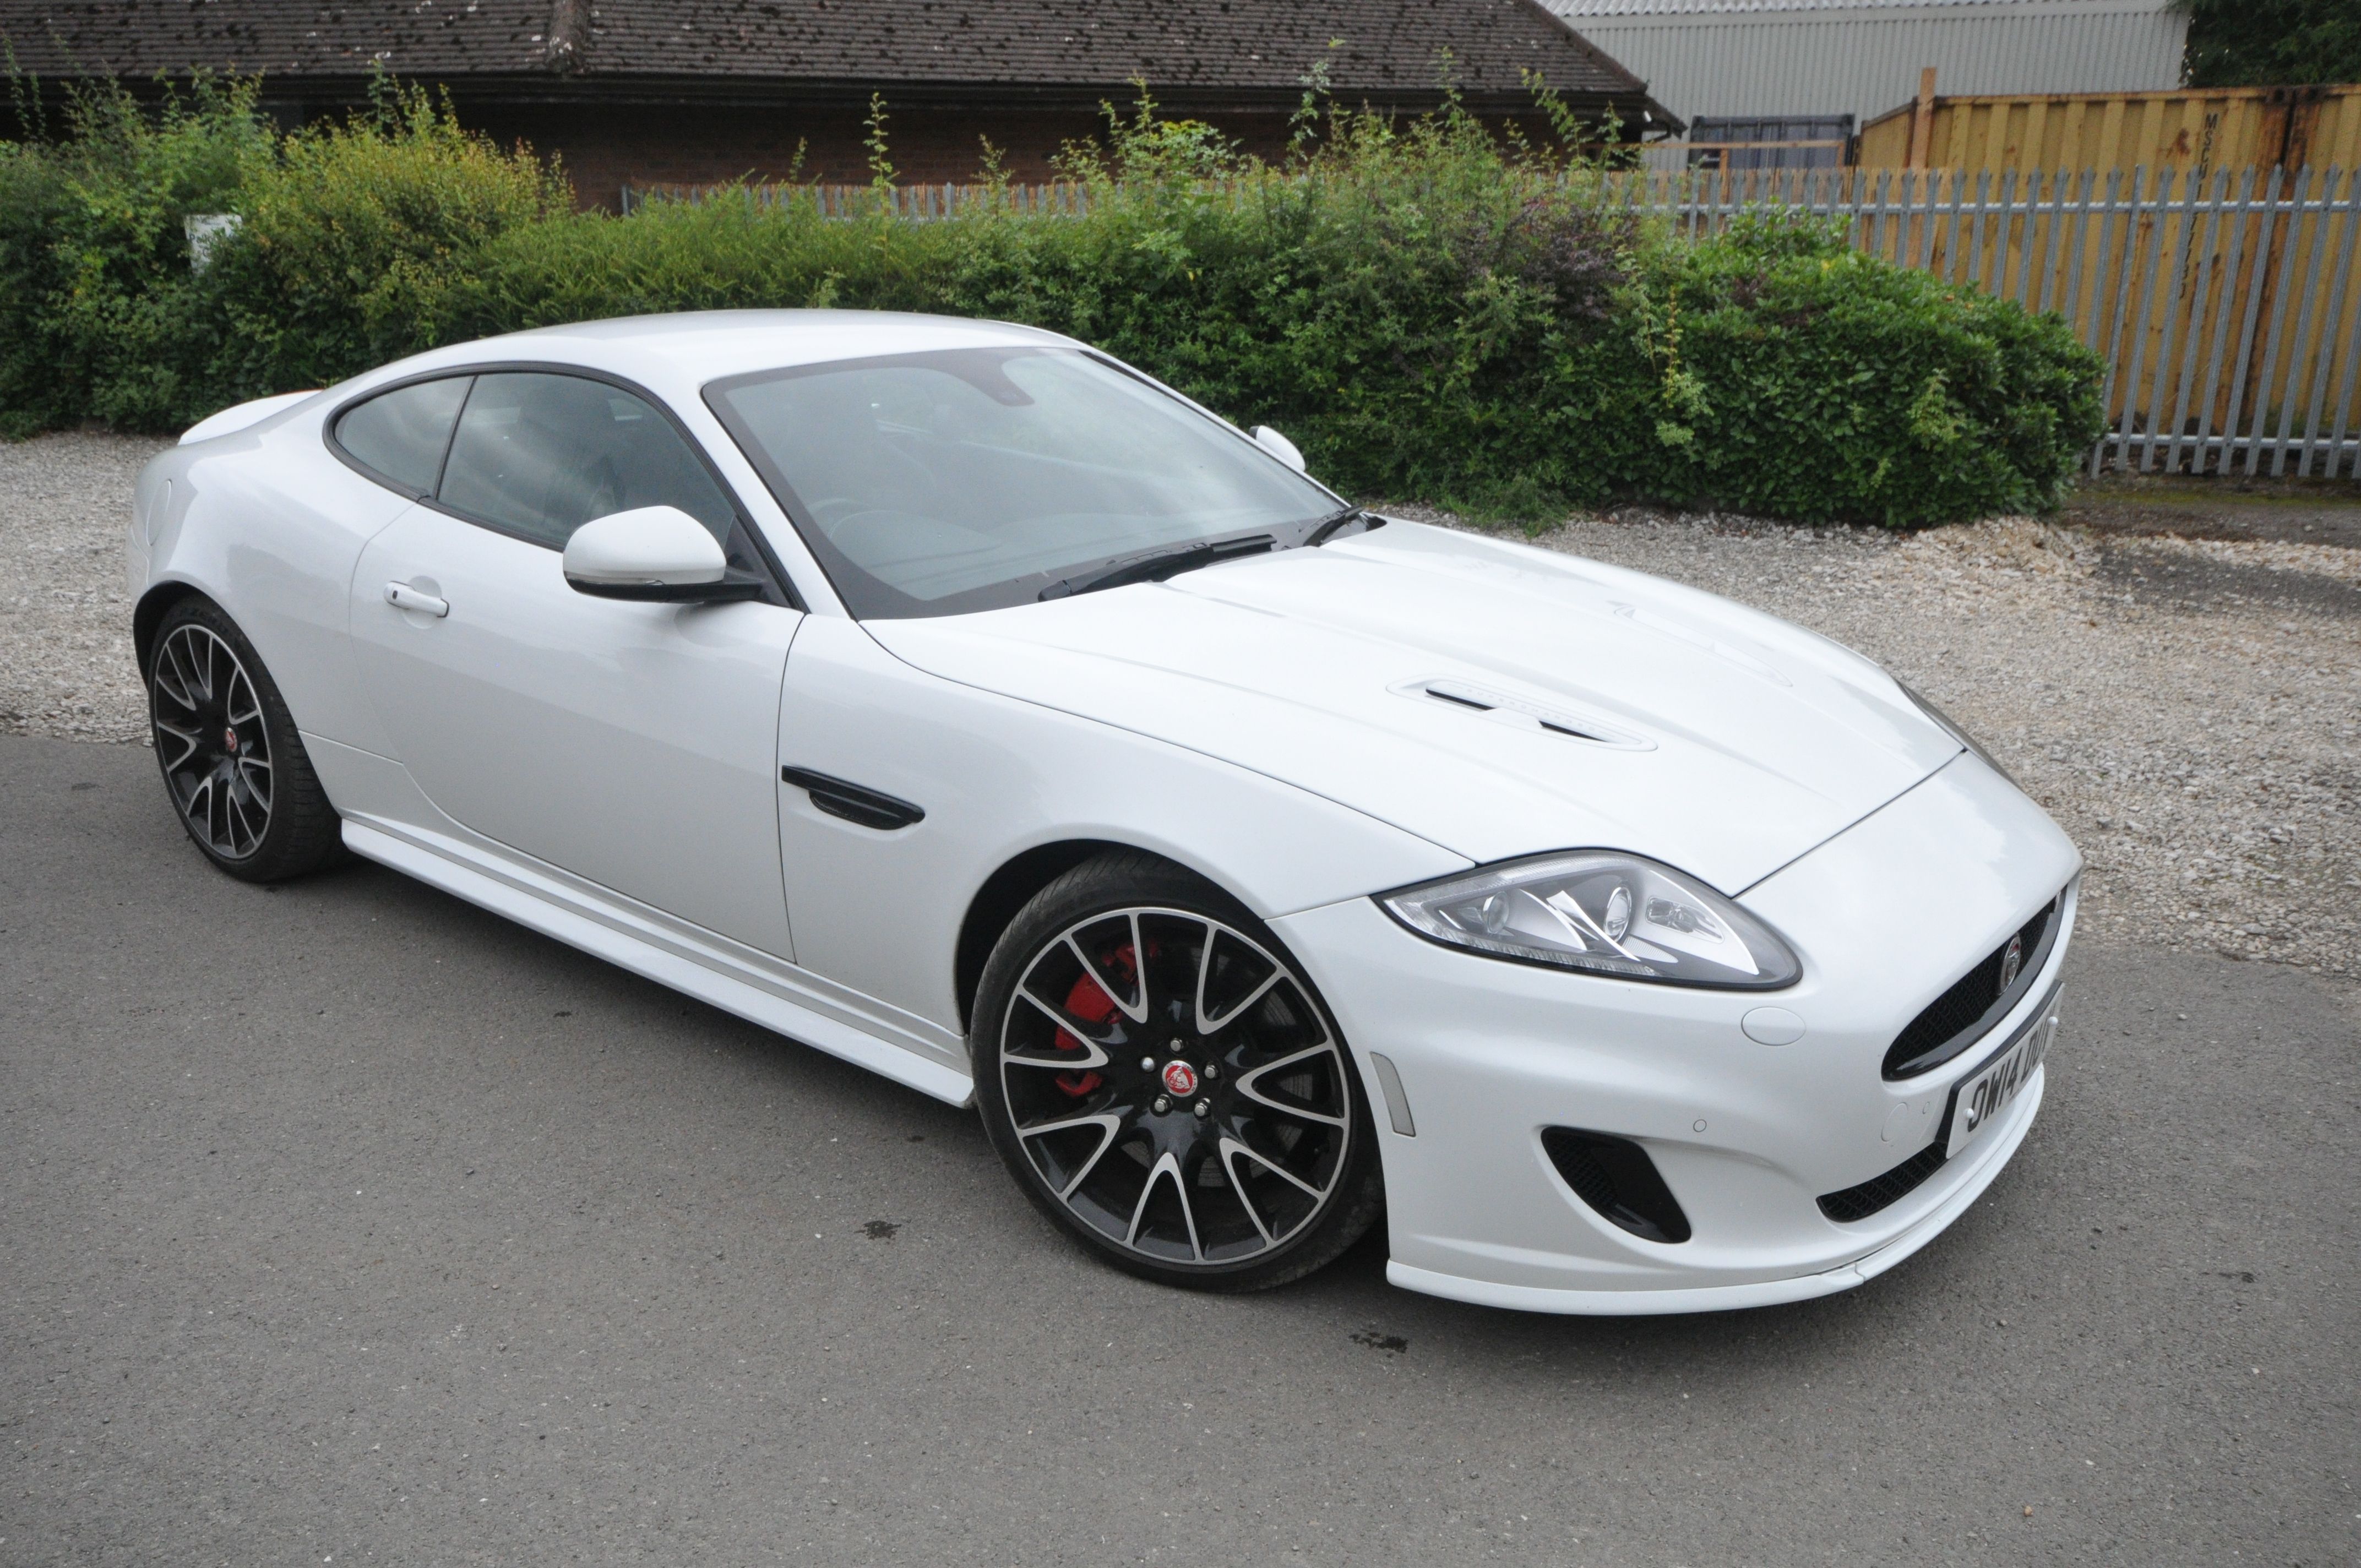 A 2014 JAGUAR XK DYNAMIC R AUTO COUPE - OW14 DUV - This vehicle was first registered in July 2014. A